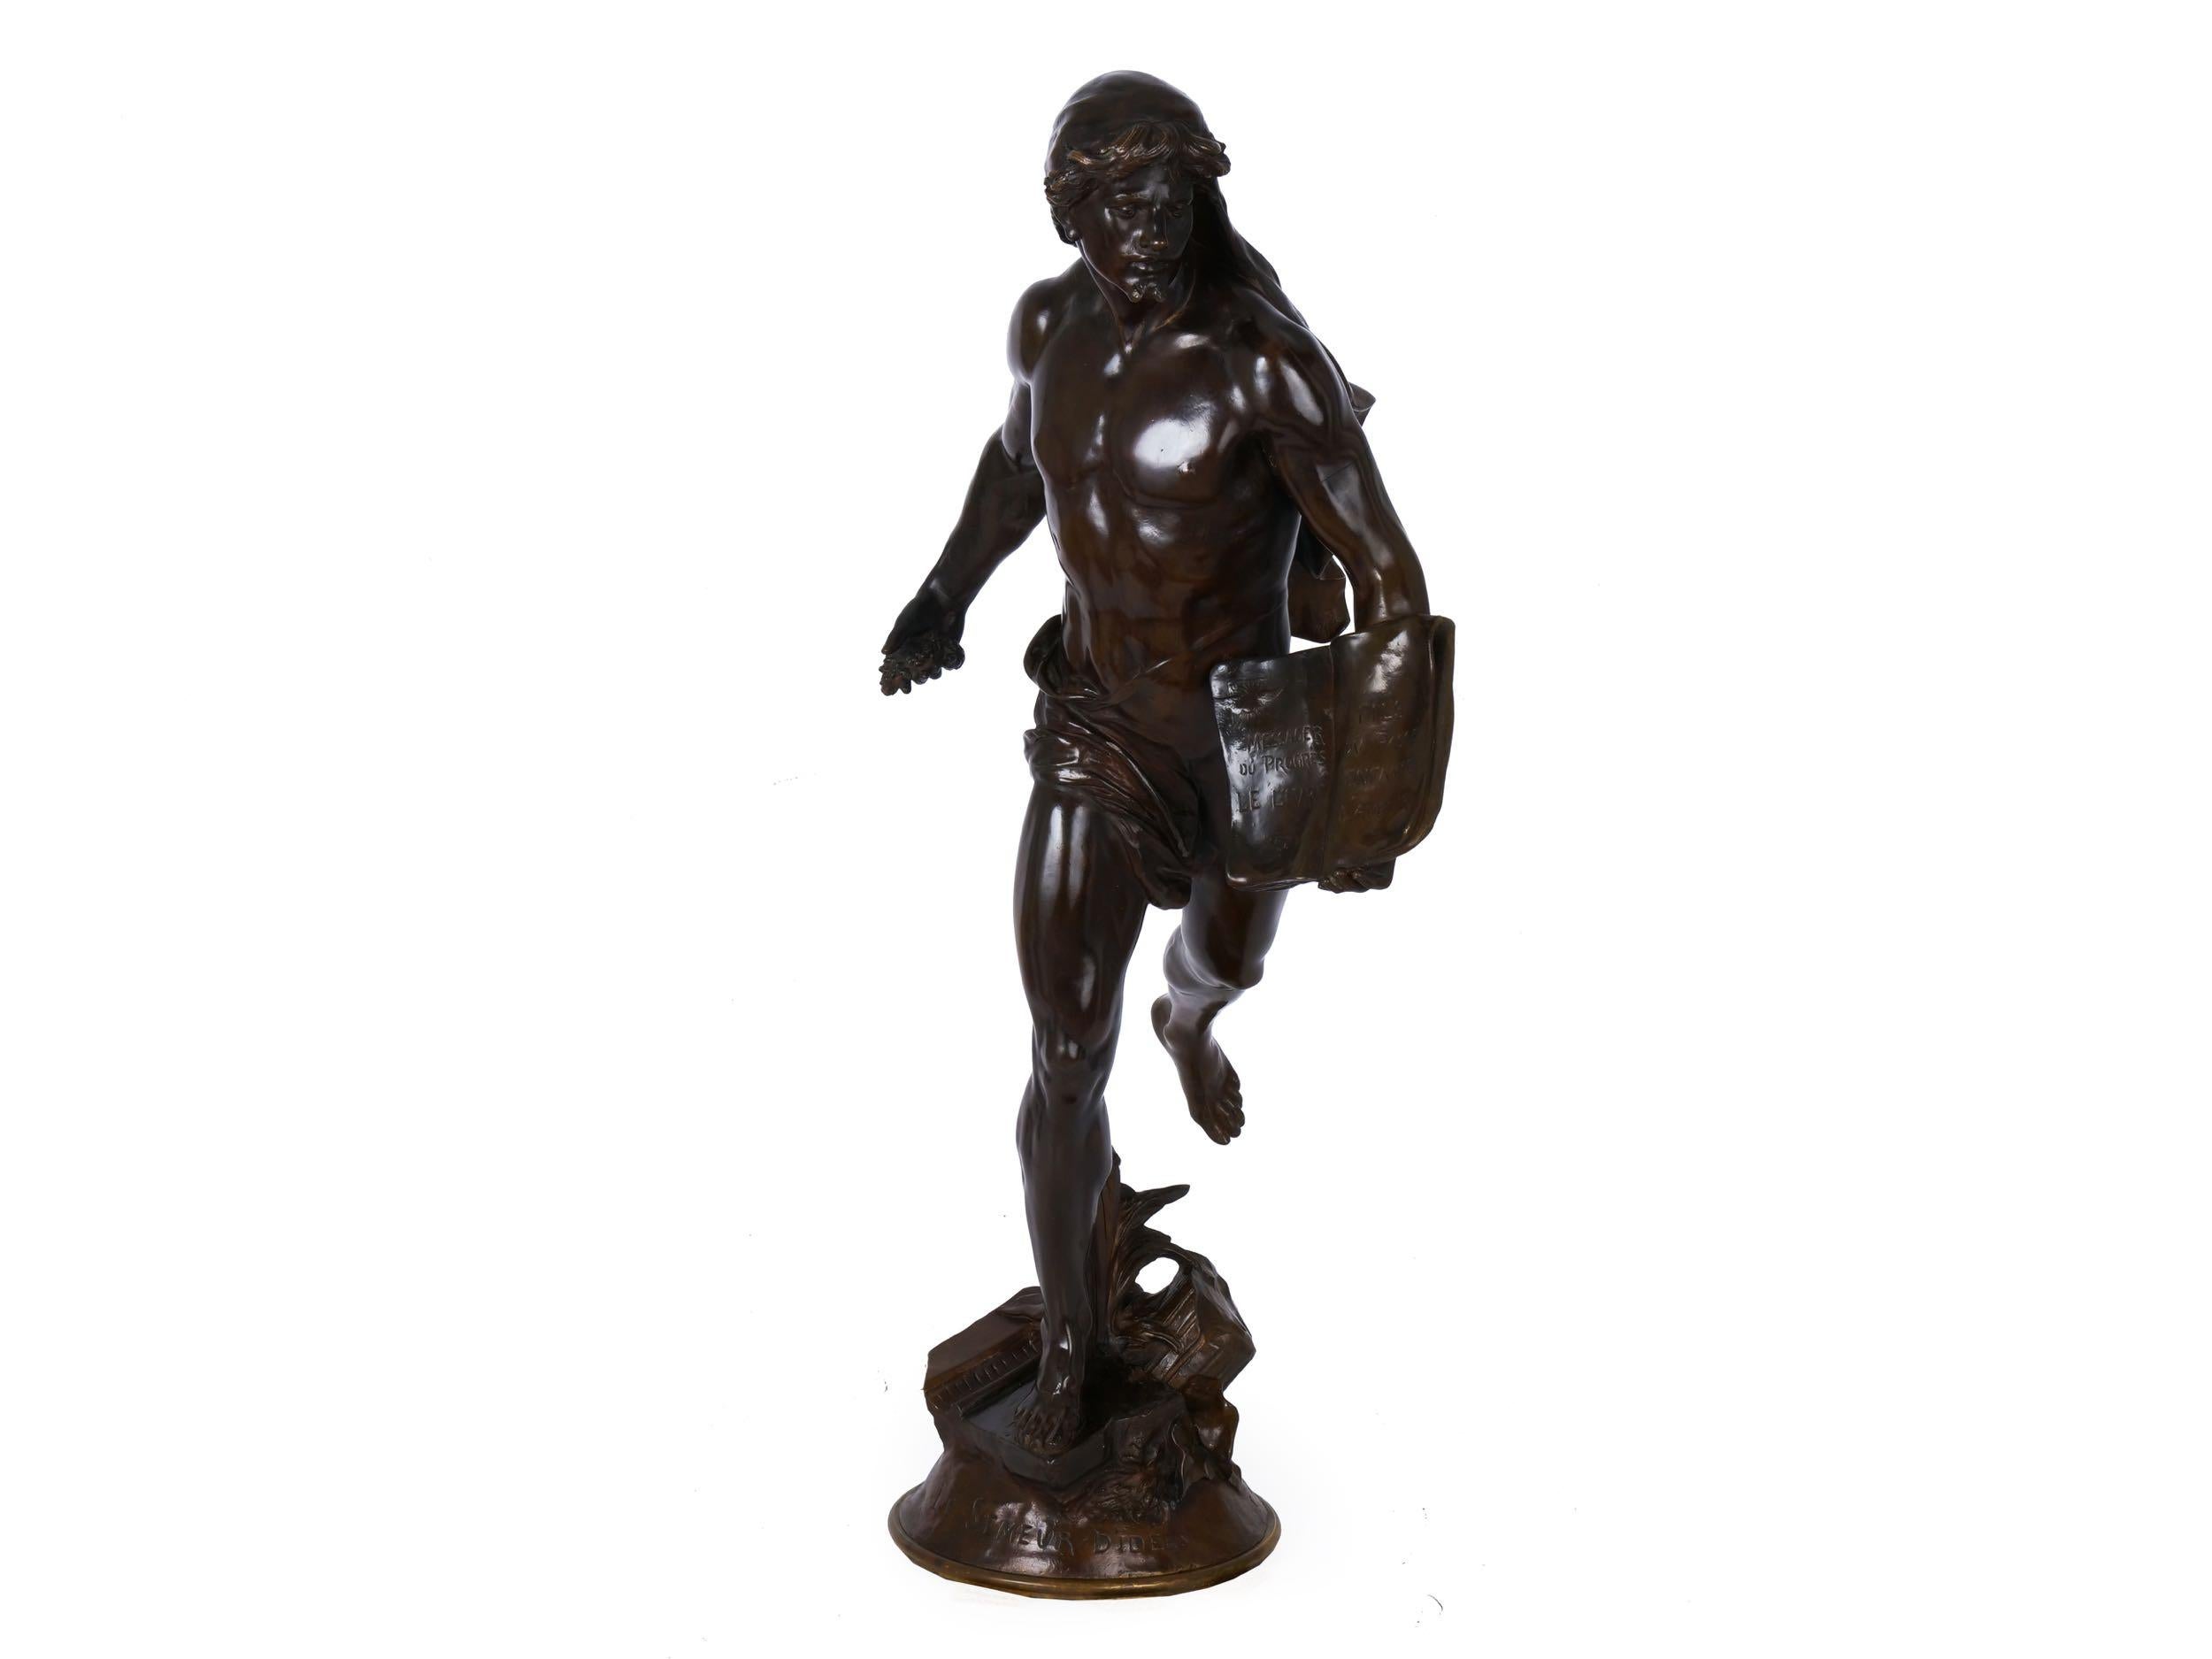 In this large and moving work, French Romantic sculptor Emile Picault perfectly captures a difficult pose as the man is depicted in full motion running across the earth with a branch of seeds in one hand and a book in the other. The work is titled